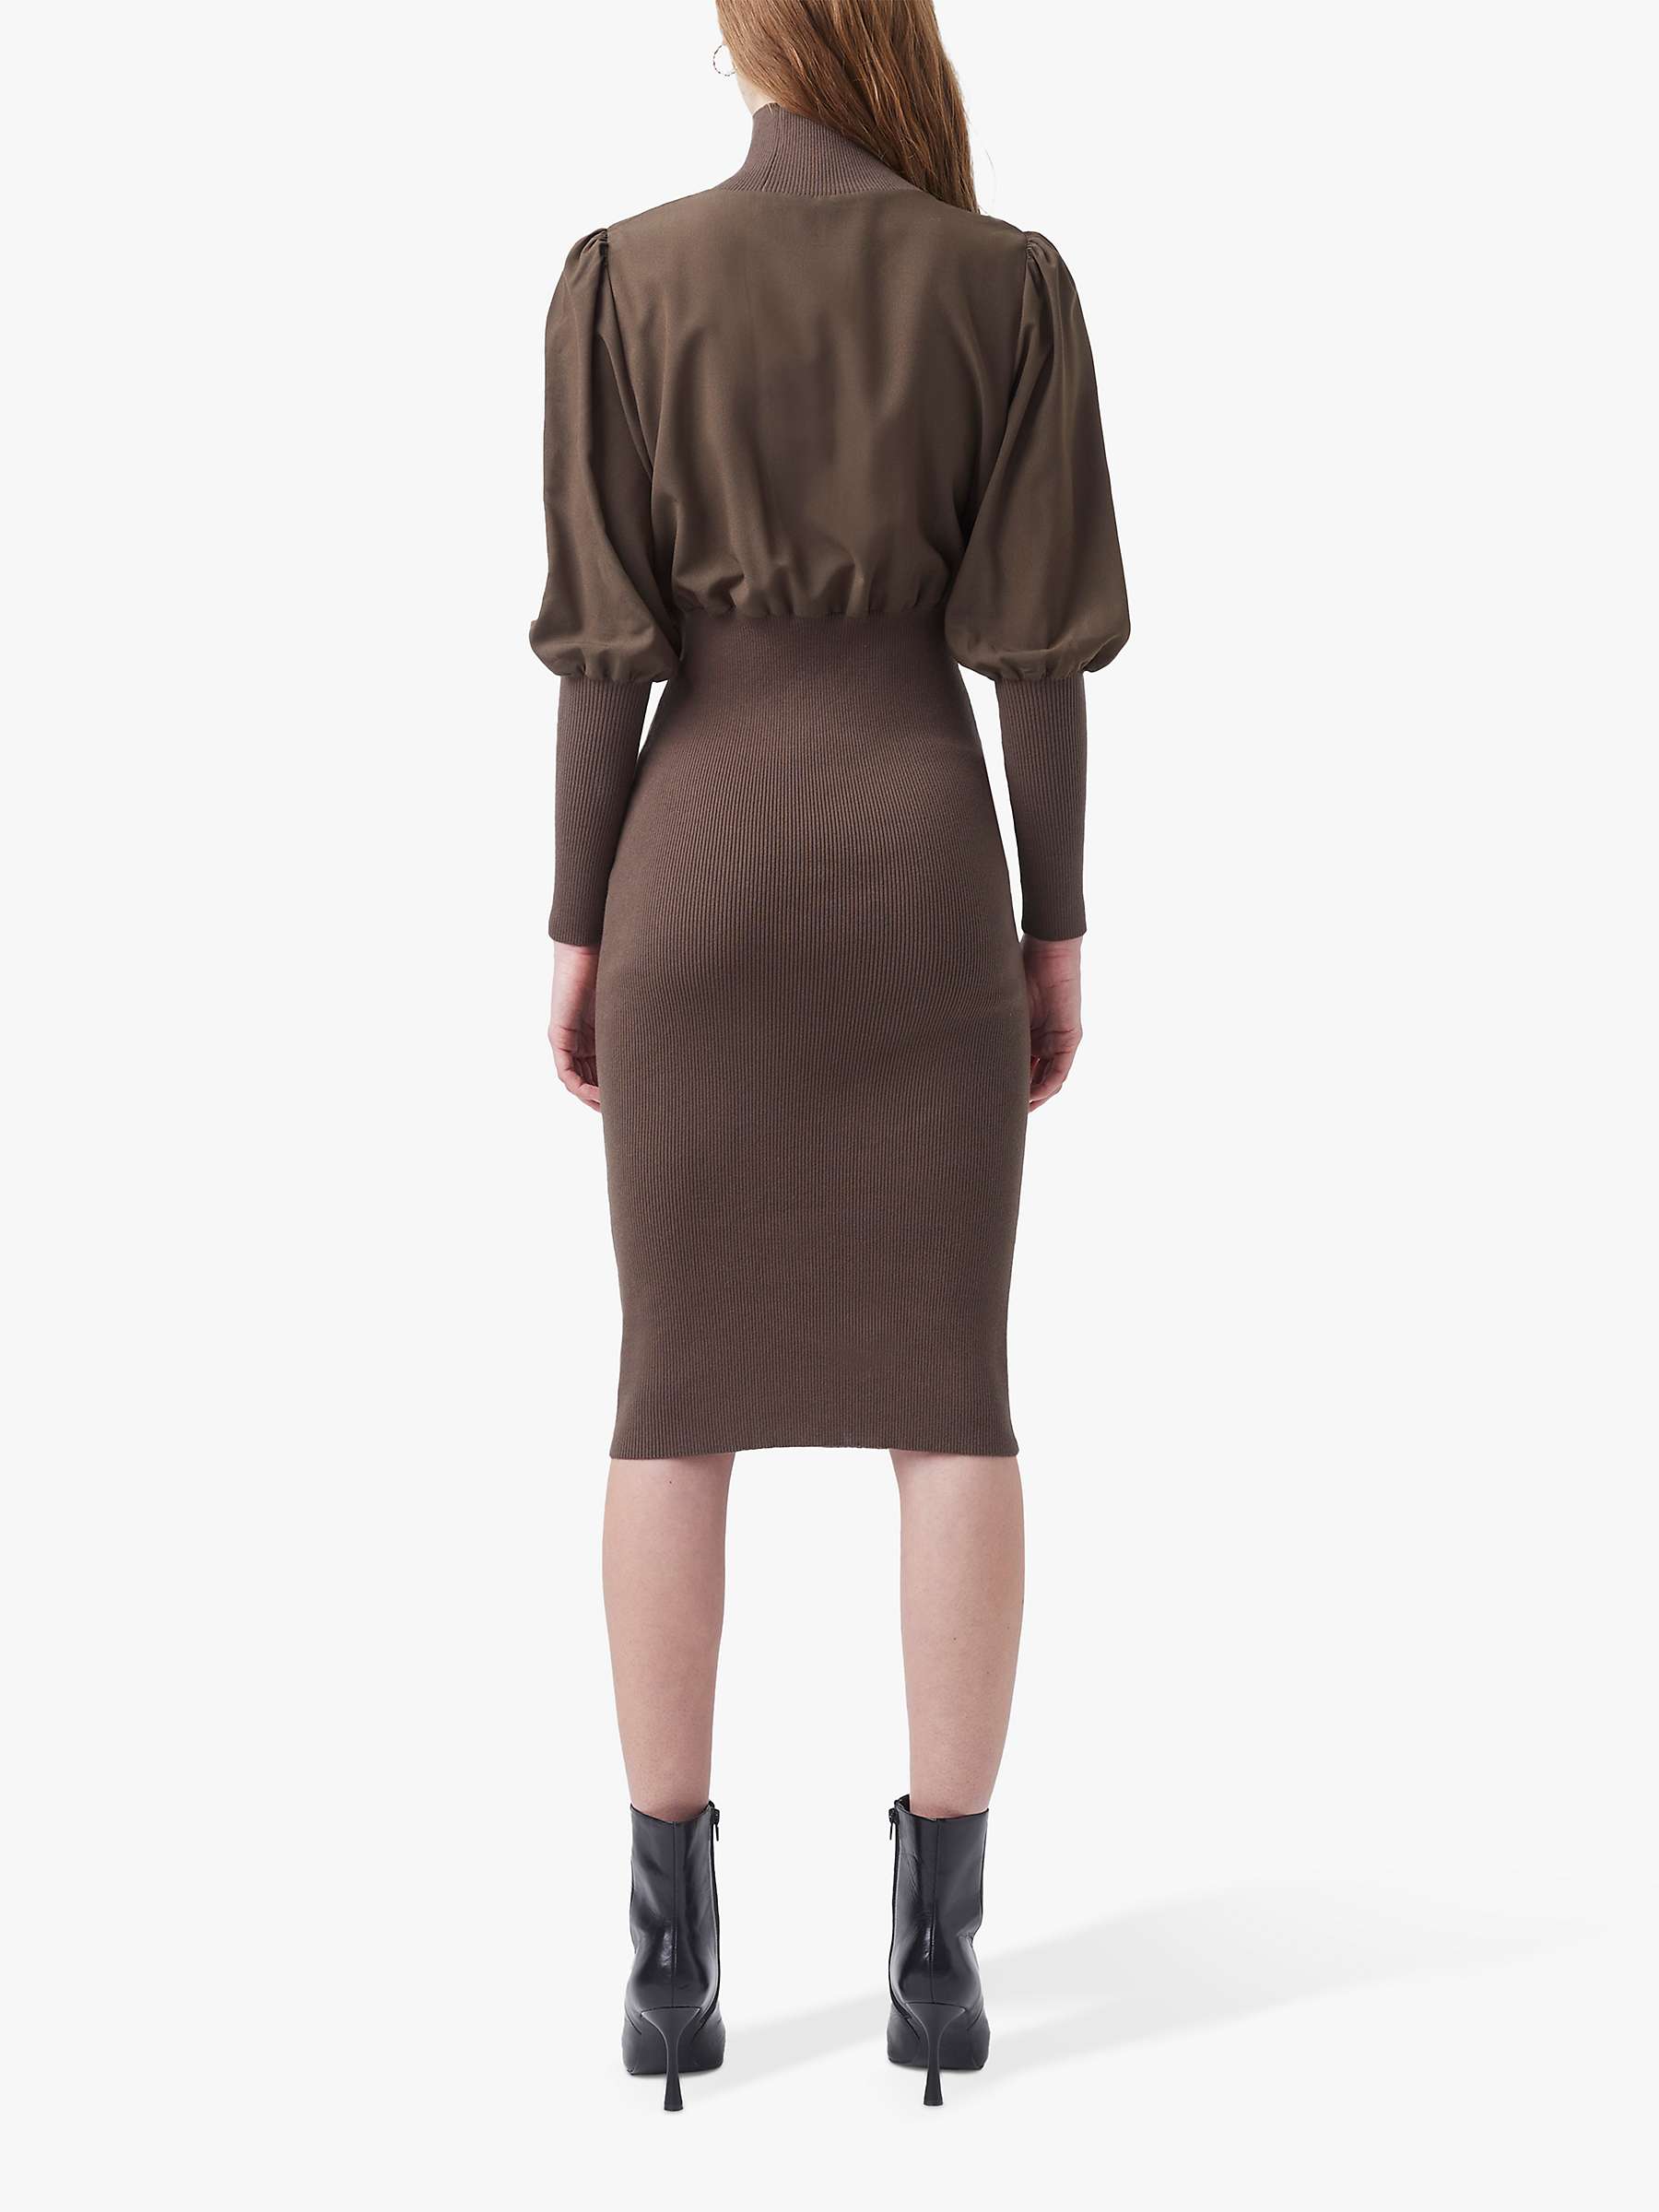 Buy French Connection Krista Ribbed Knit Dress, Deep Moss Online at johnlewis.com